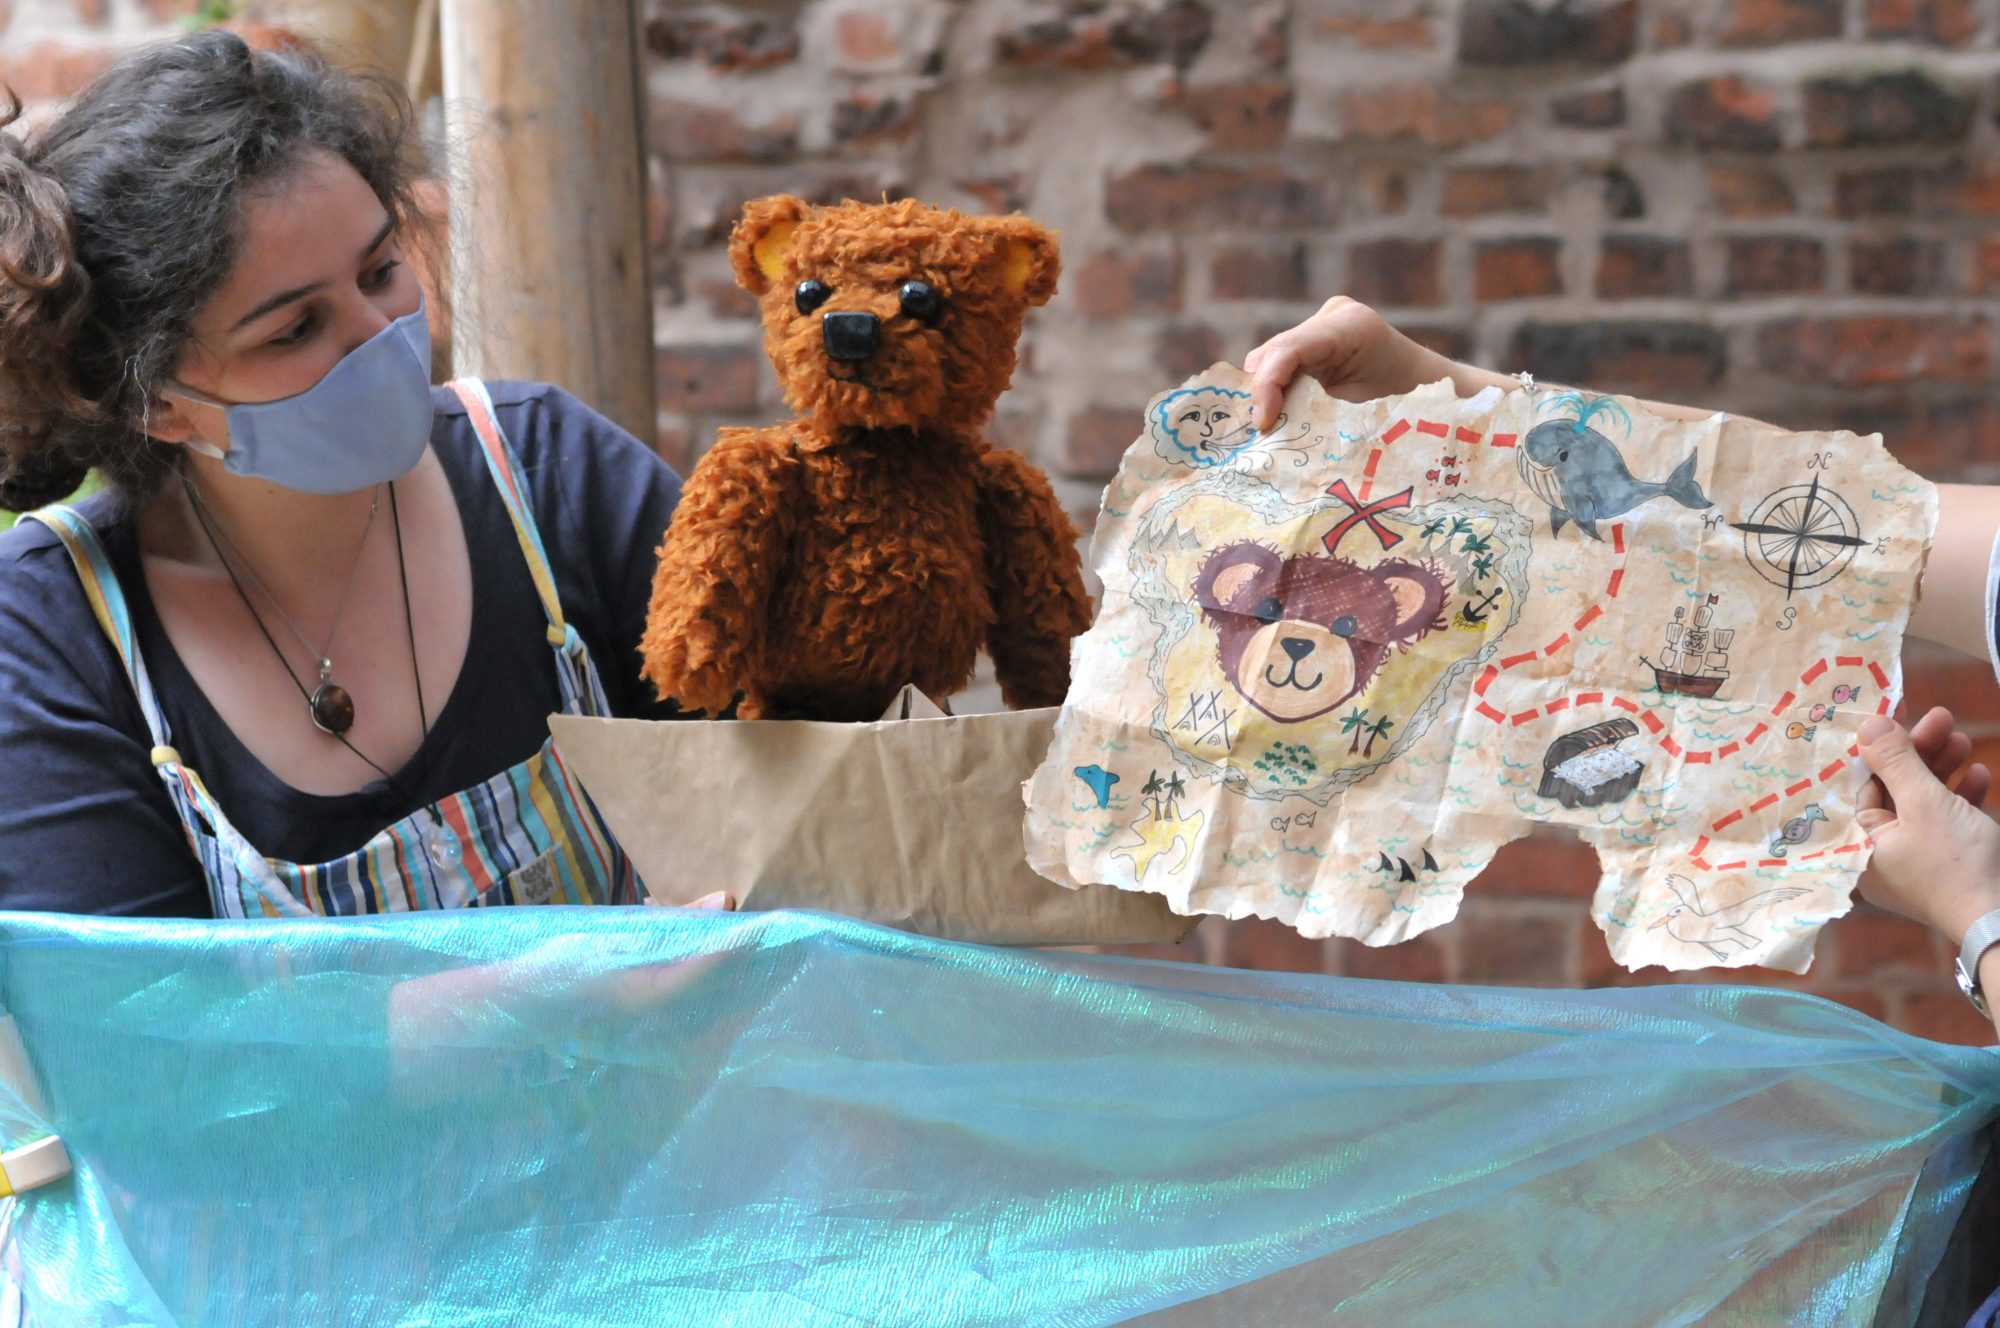 GPT A woman wearing a mask shows a hand-drawn treasure map to a teddy bear.